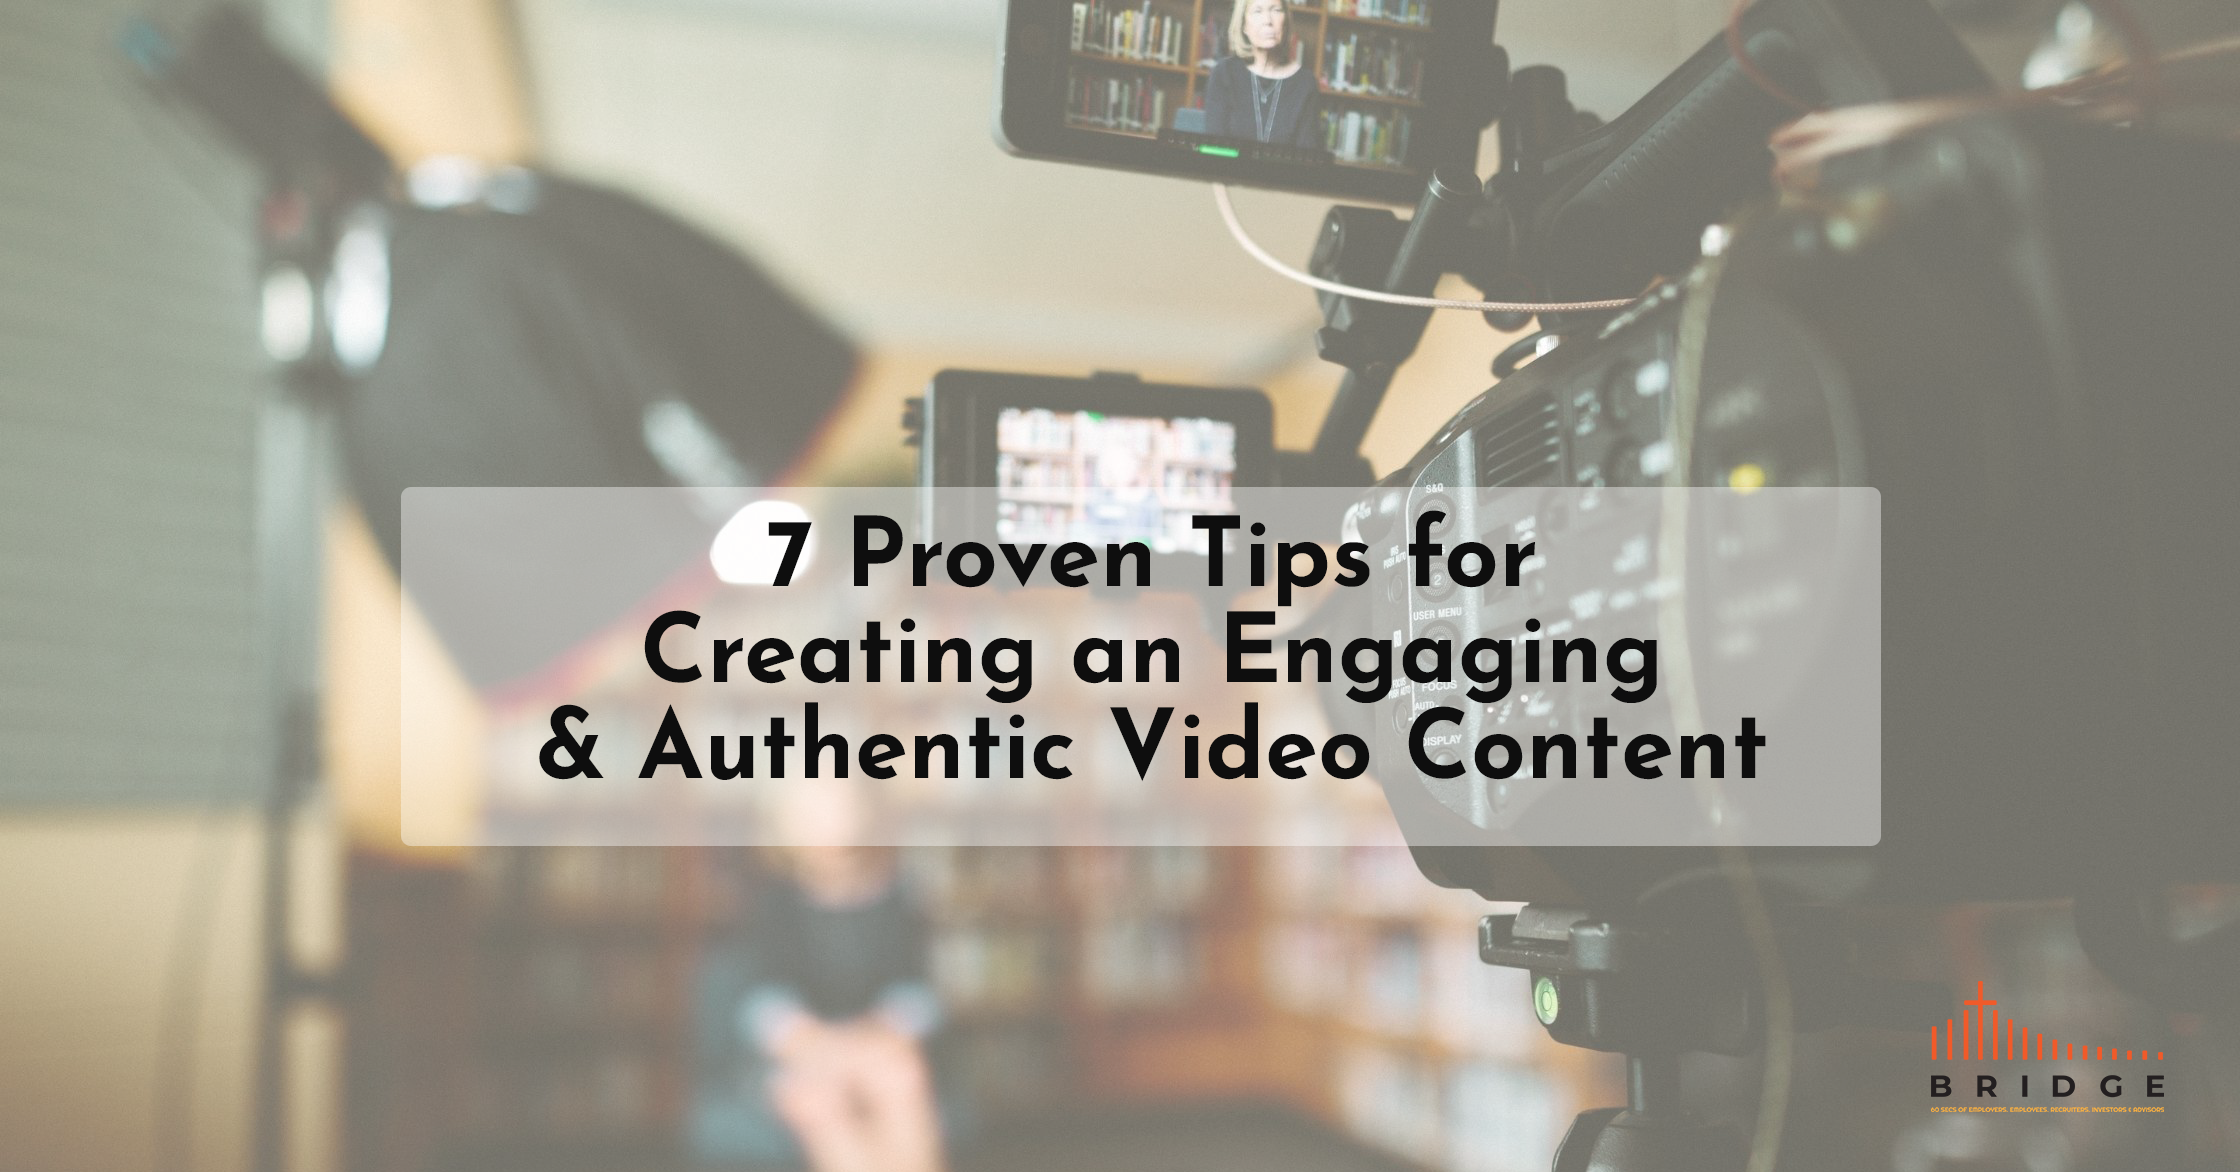 7 Proven Tips for Creating an Engaging & Authentic Video Content